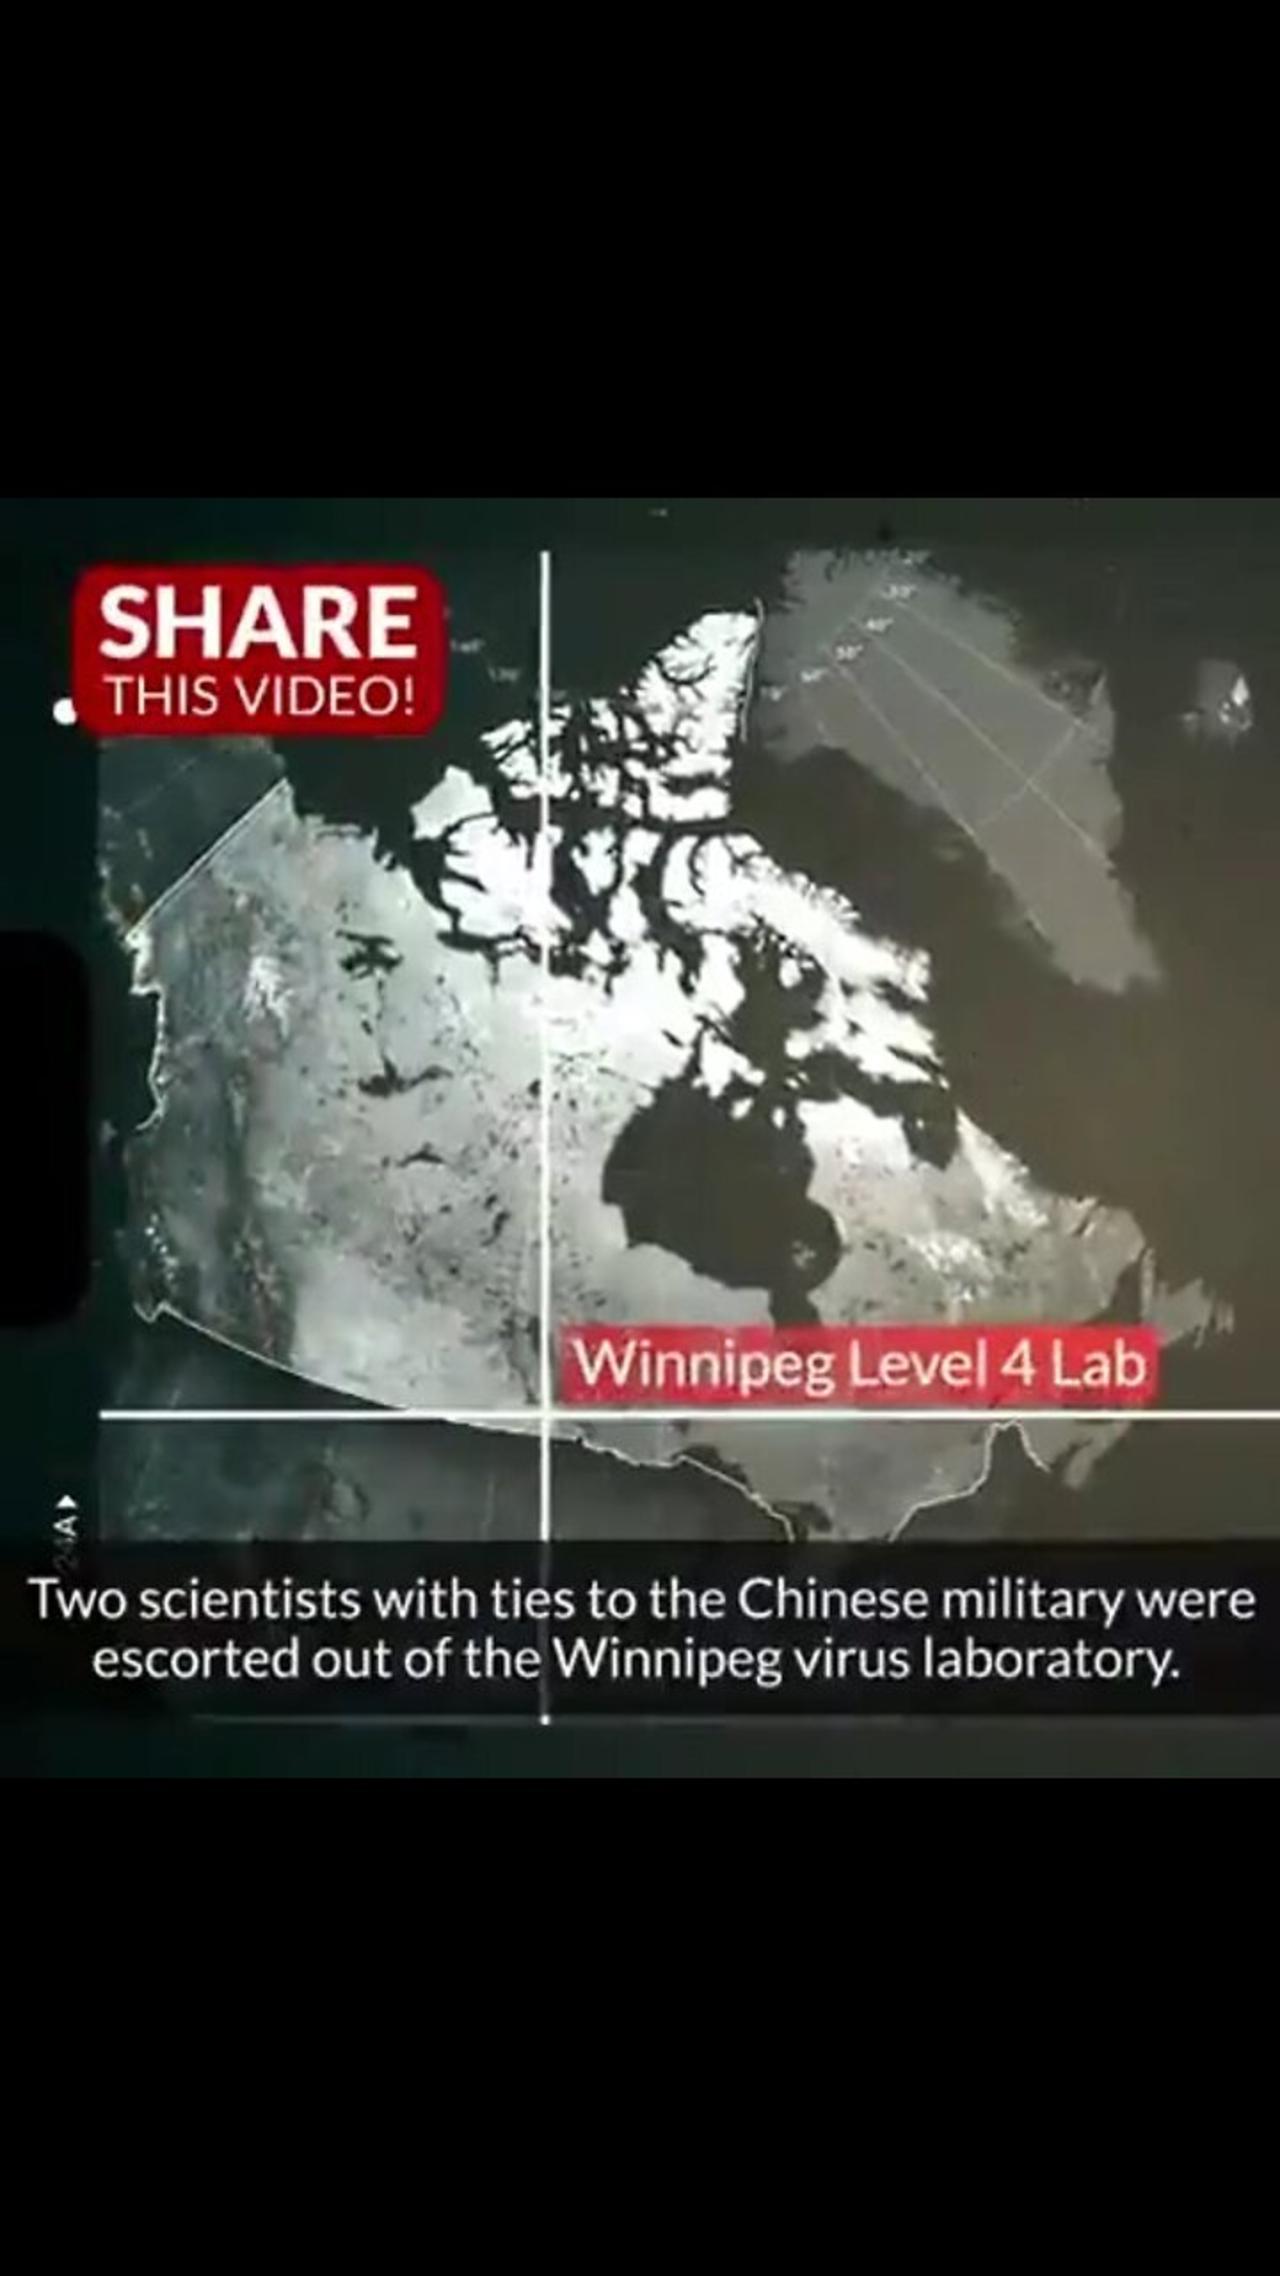 Proof That Justin Trudeau's Knowingly Complicit In Developing Bioweapons With China At The Wuhan Lab